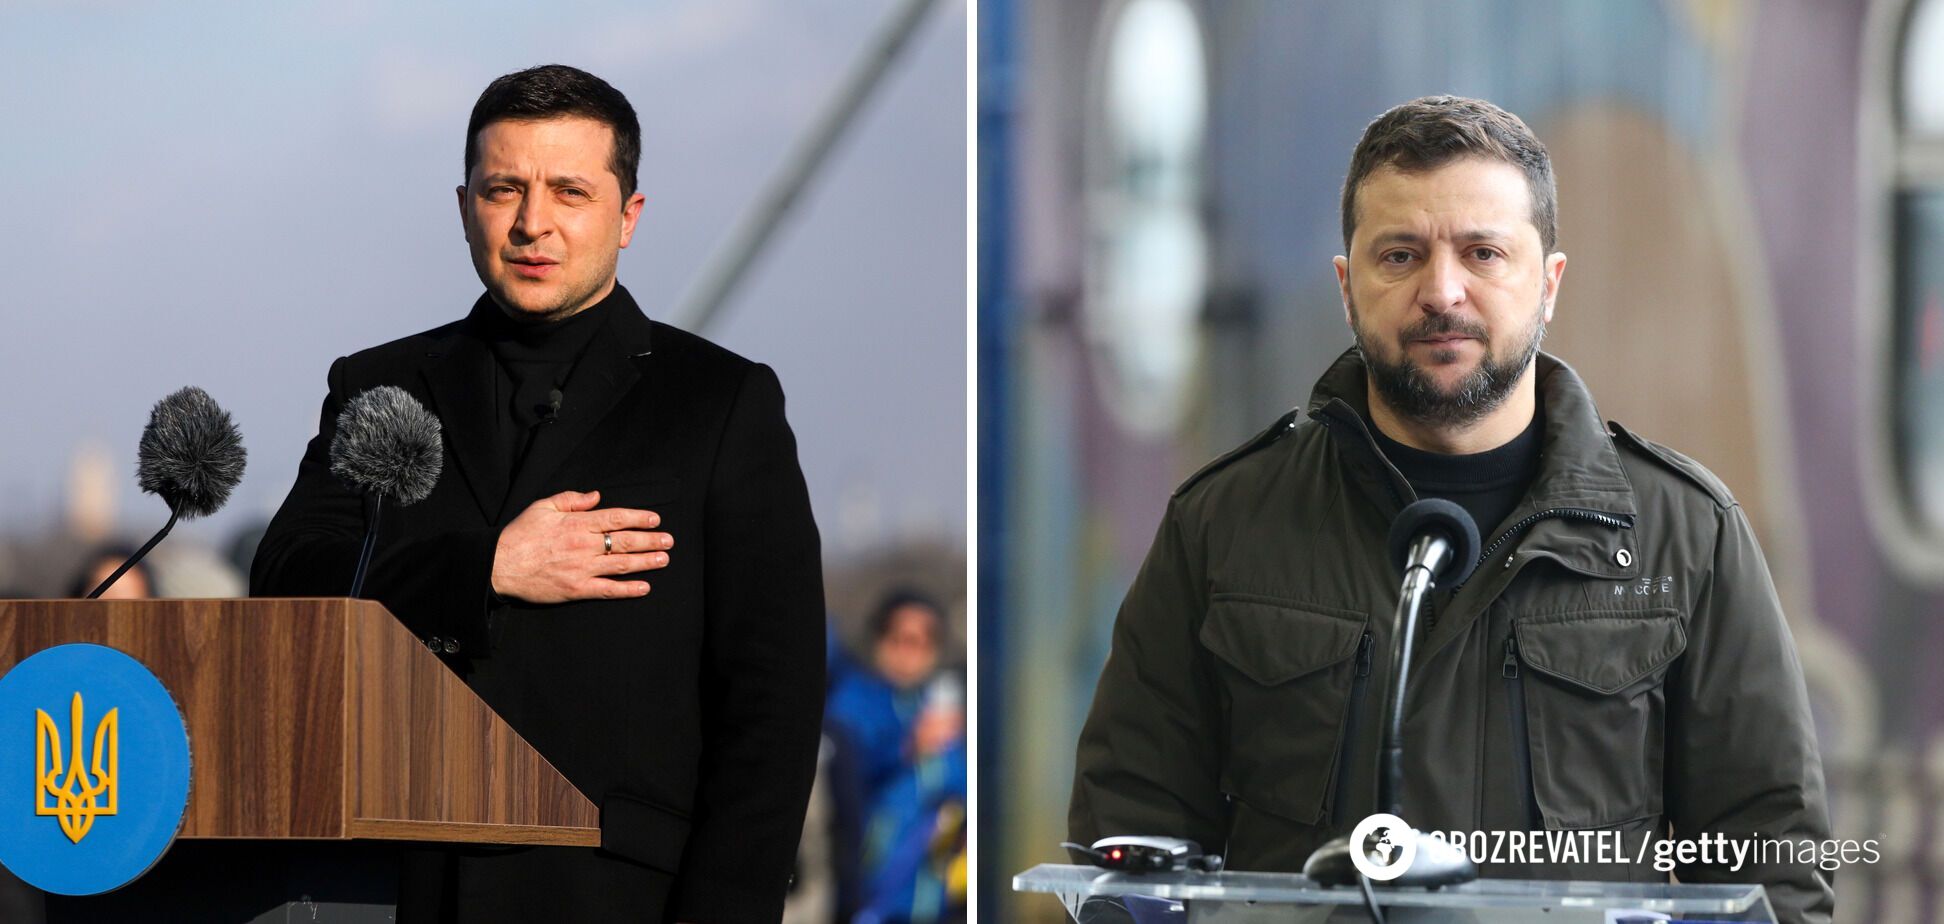 Tired but strong: how Zelensky's look changed after almost two years of full-scale war. Photo